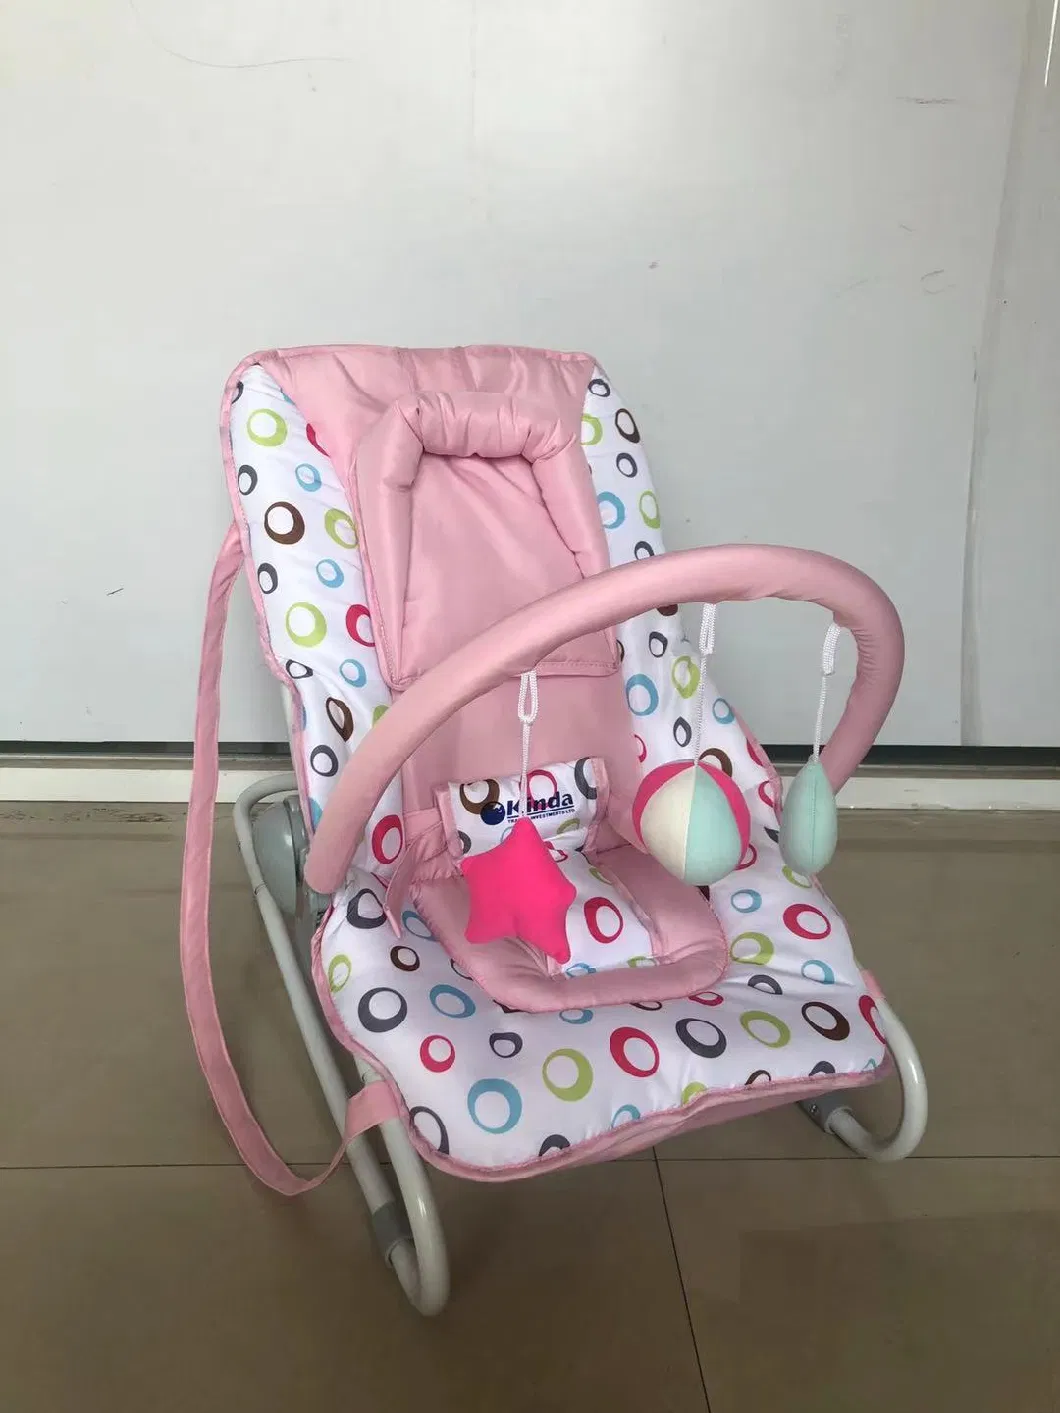 Colorful Cute Electric Vibrating Relaxing Sleeping Infant Baby Rocking Chair Toddler Rocker